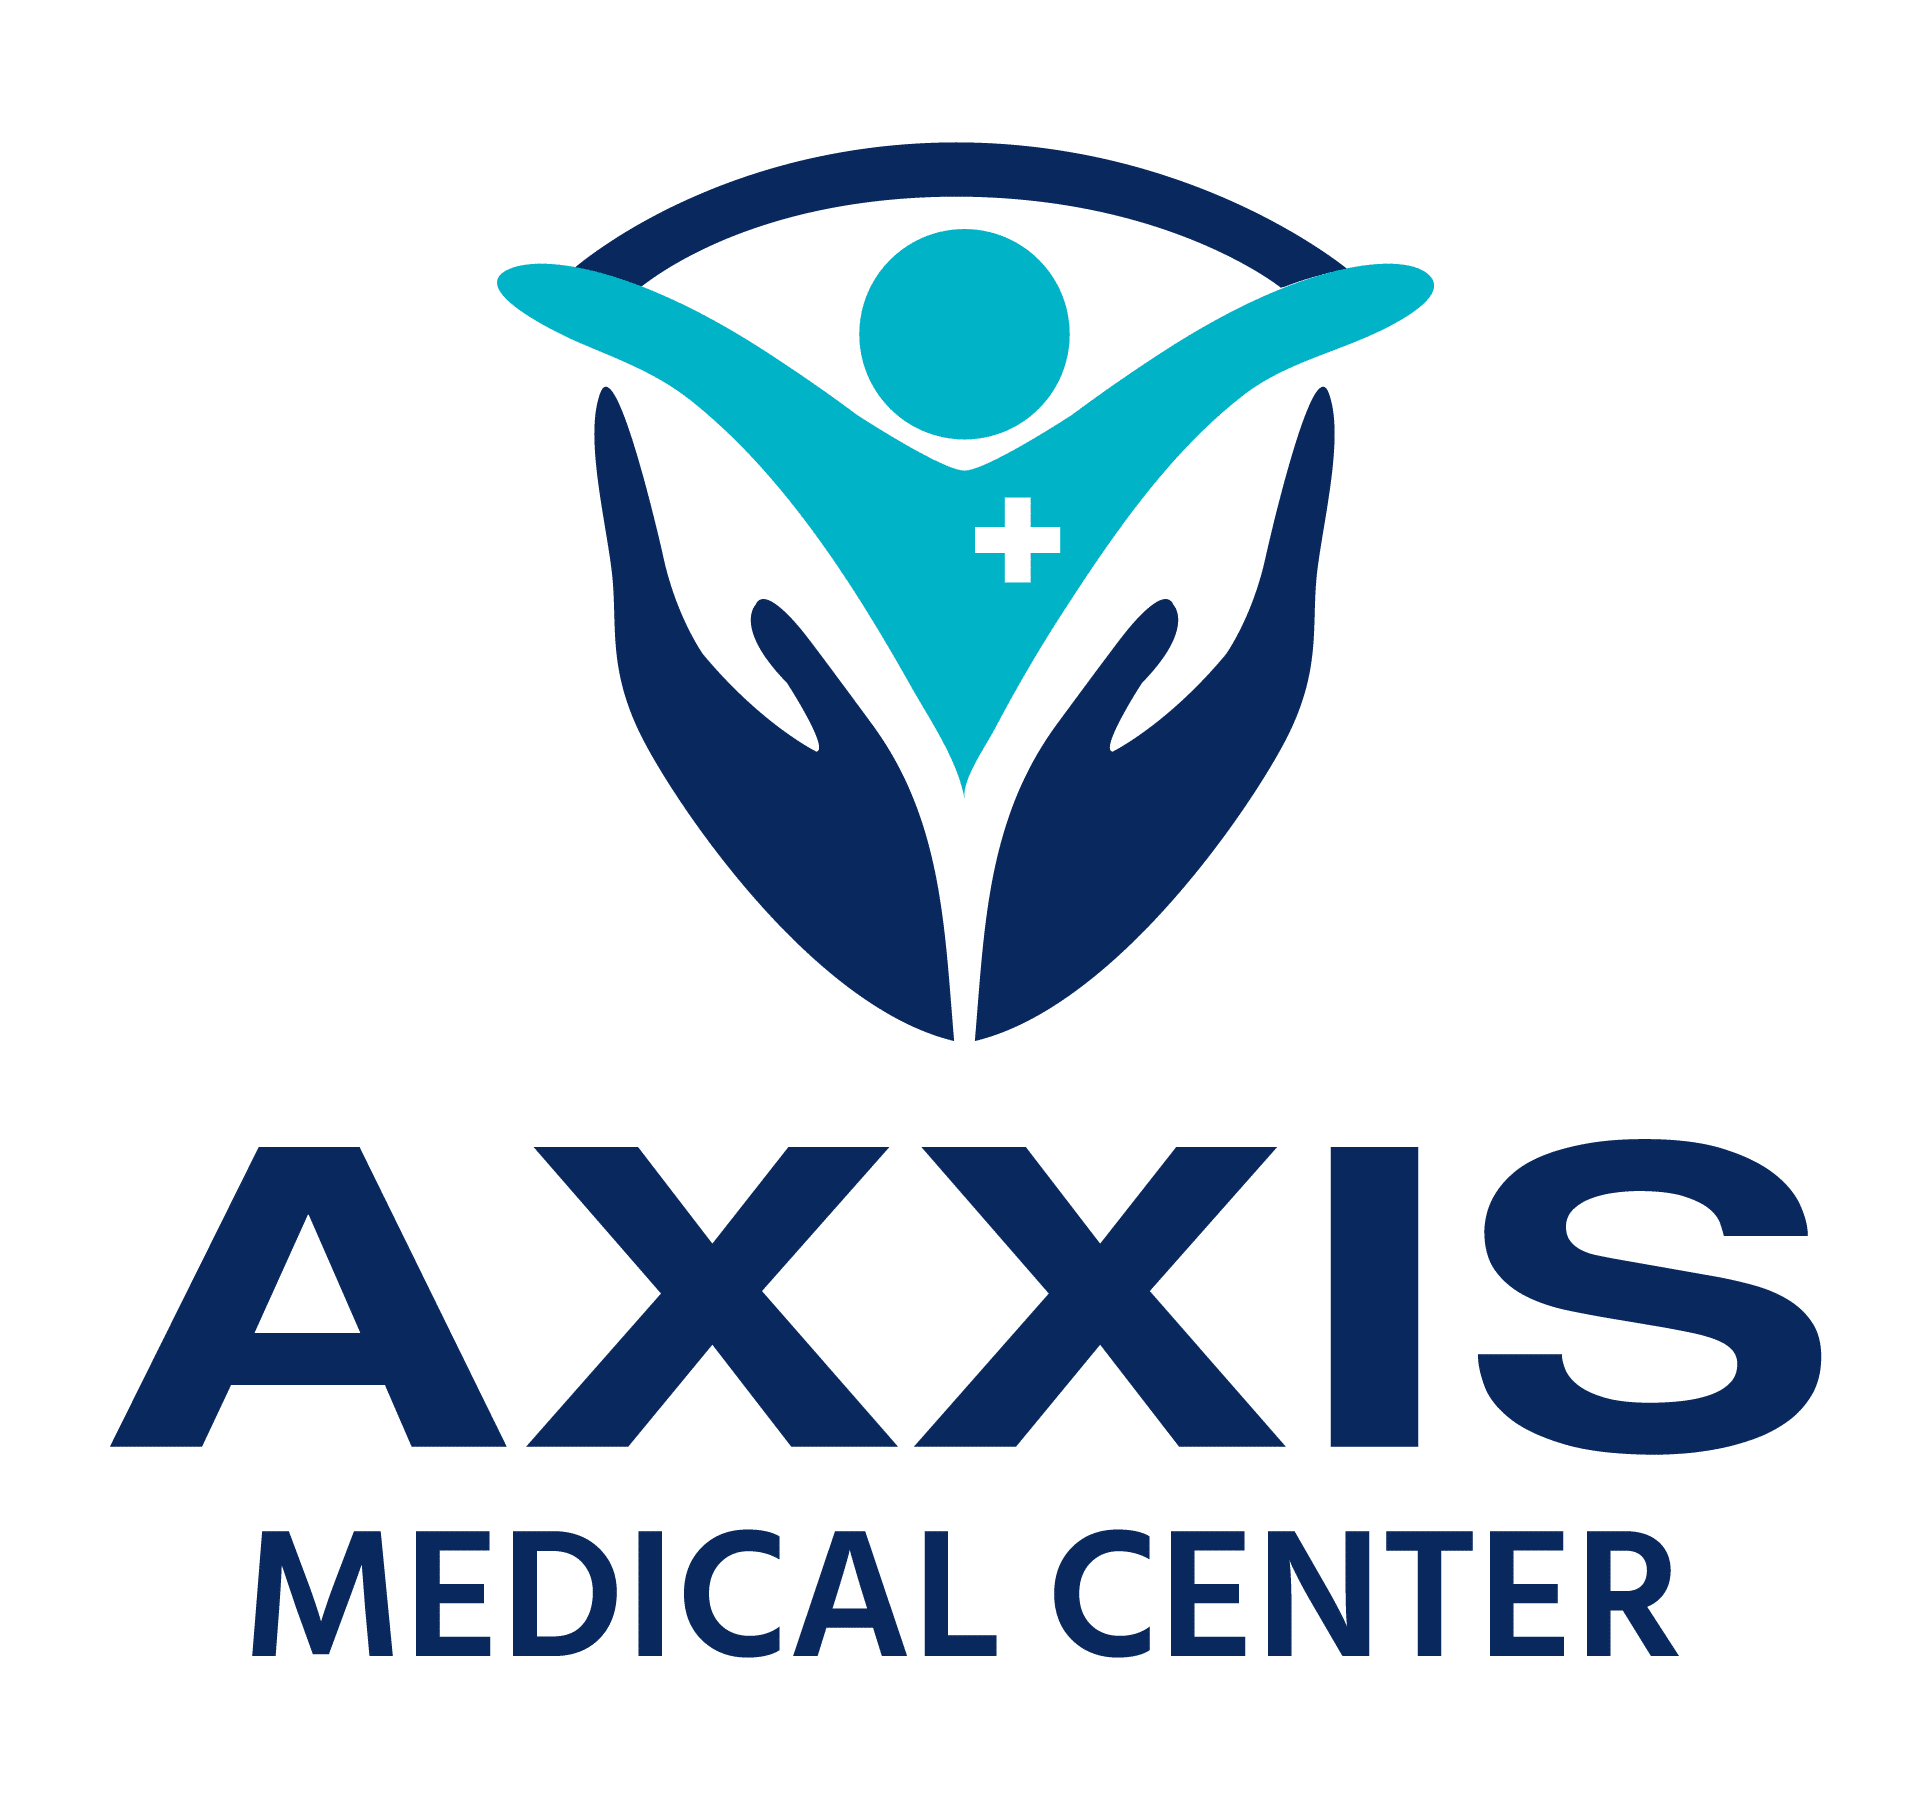 AXXIS Medical Center